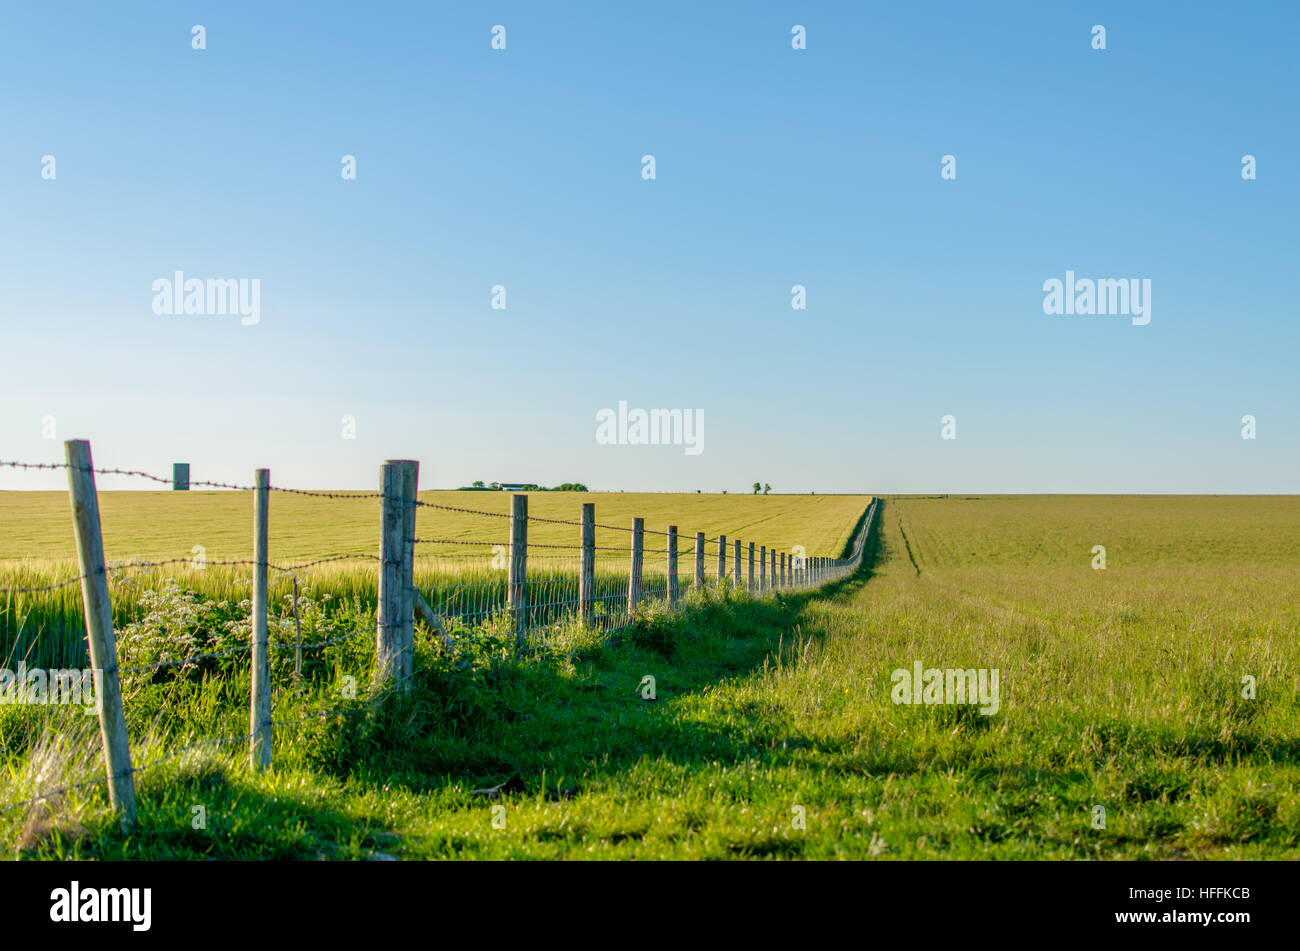 Linear perspective of a boundary fence running through an idyllic farm Stock Photo